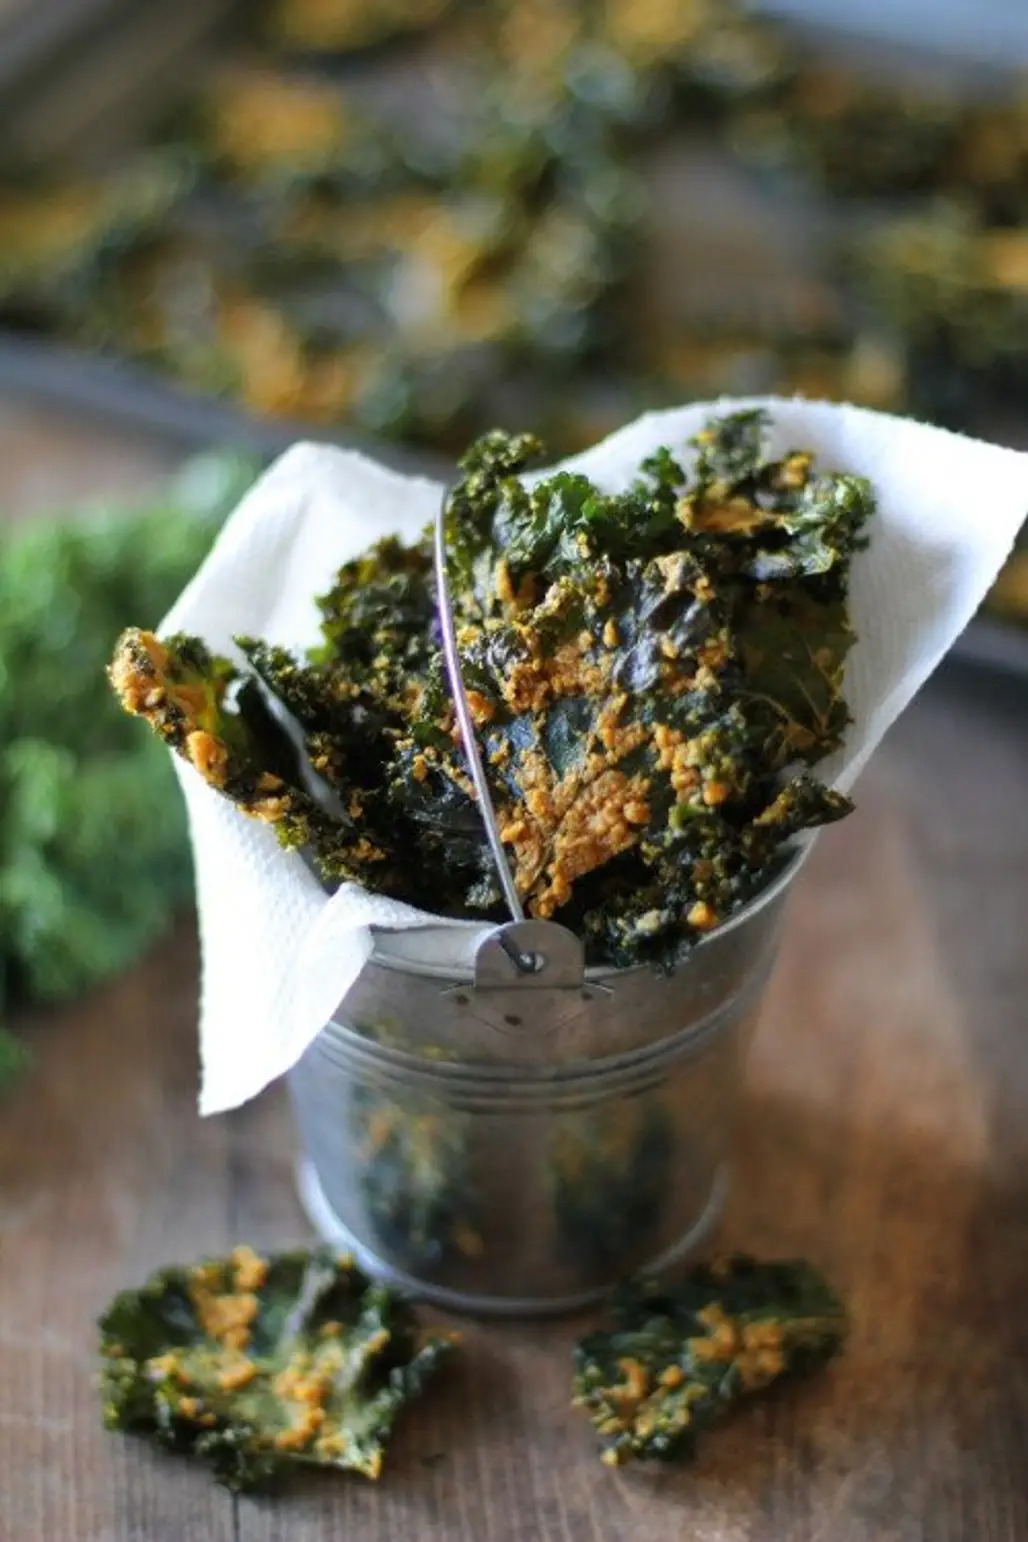 Kale Chips Are a Tasty Option